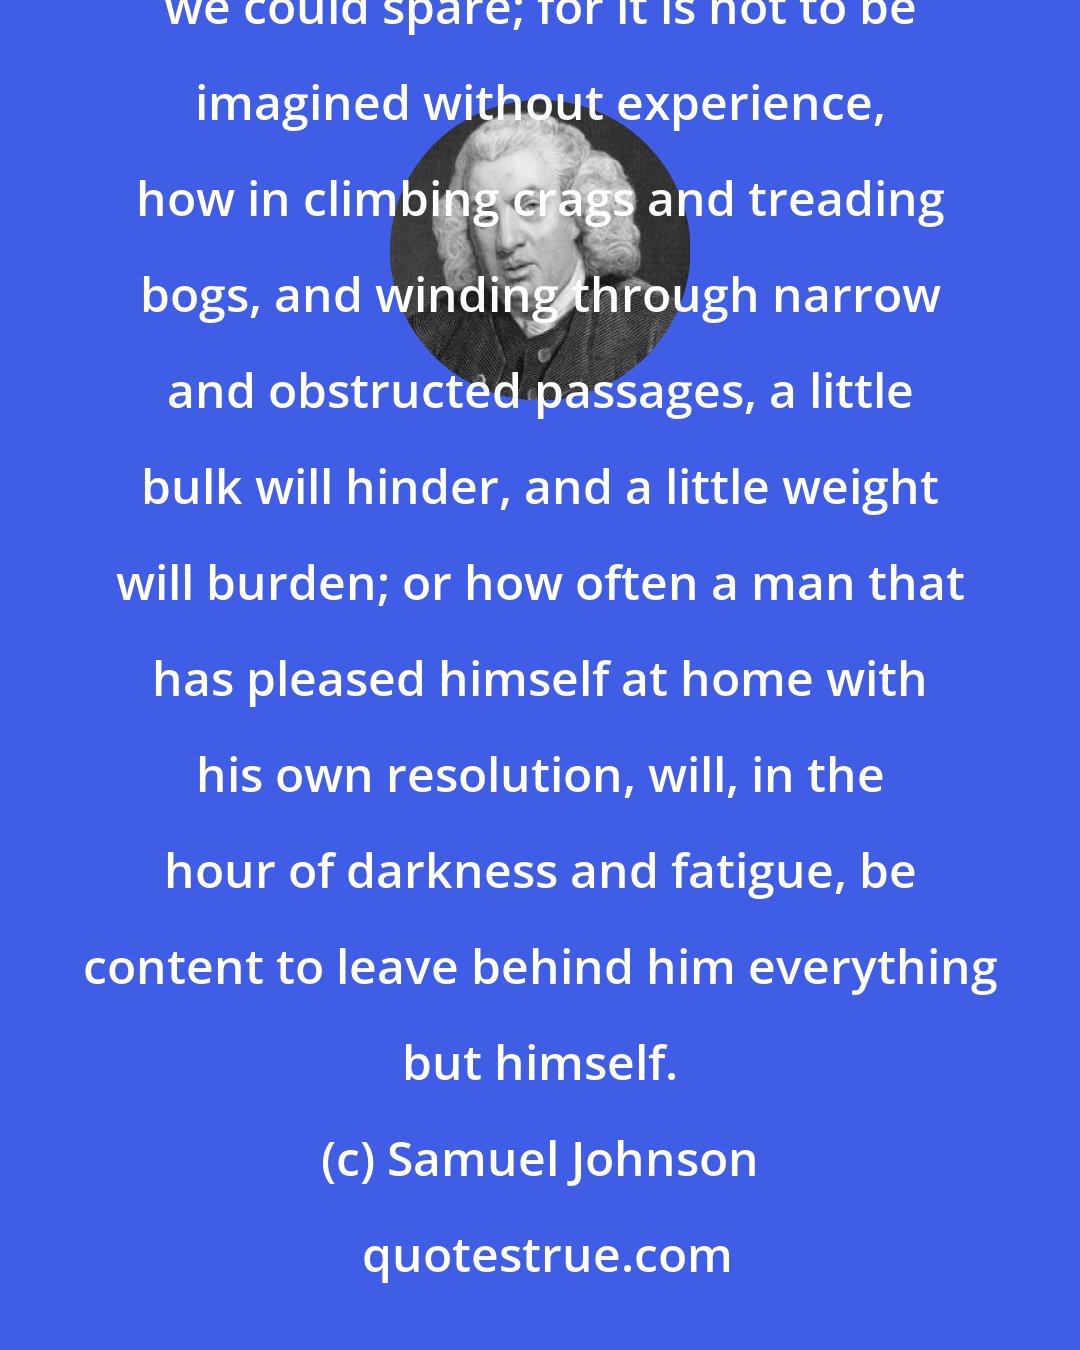 Samuel Johnson: We found in the course of our journey the convenience of having disencumbered ourselves, by laying aside whatever we could spare; for it is not to be imagined without experience, how in climbing crags and treading bogs, and winding through narrow and obstructed passages, a little bulk will hinder, and a little weight will burden; or how often a man that has pleased himself at home with his own resolution, will, in the hour of darkness and fatigue, be content to leave behind him everything but himself.